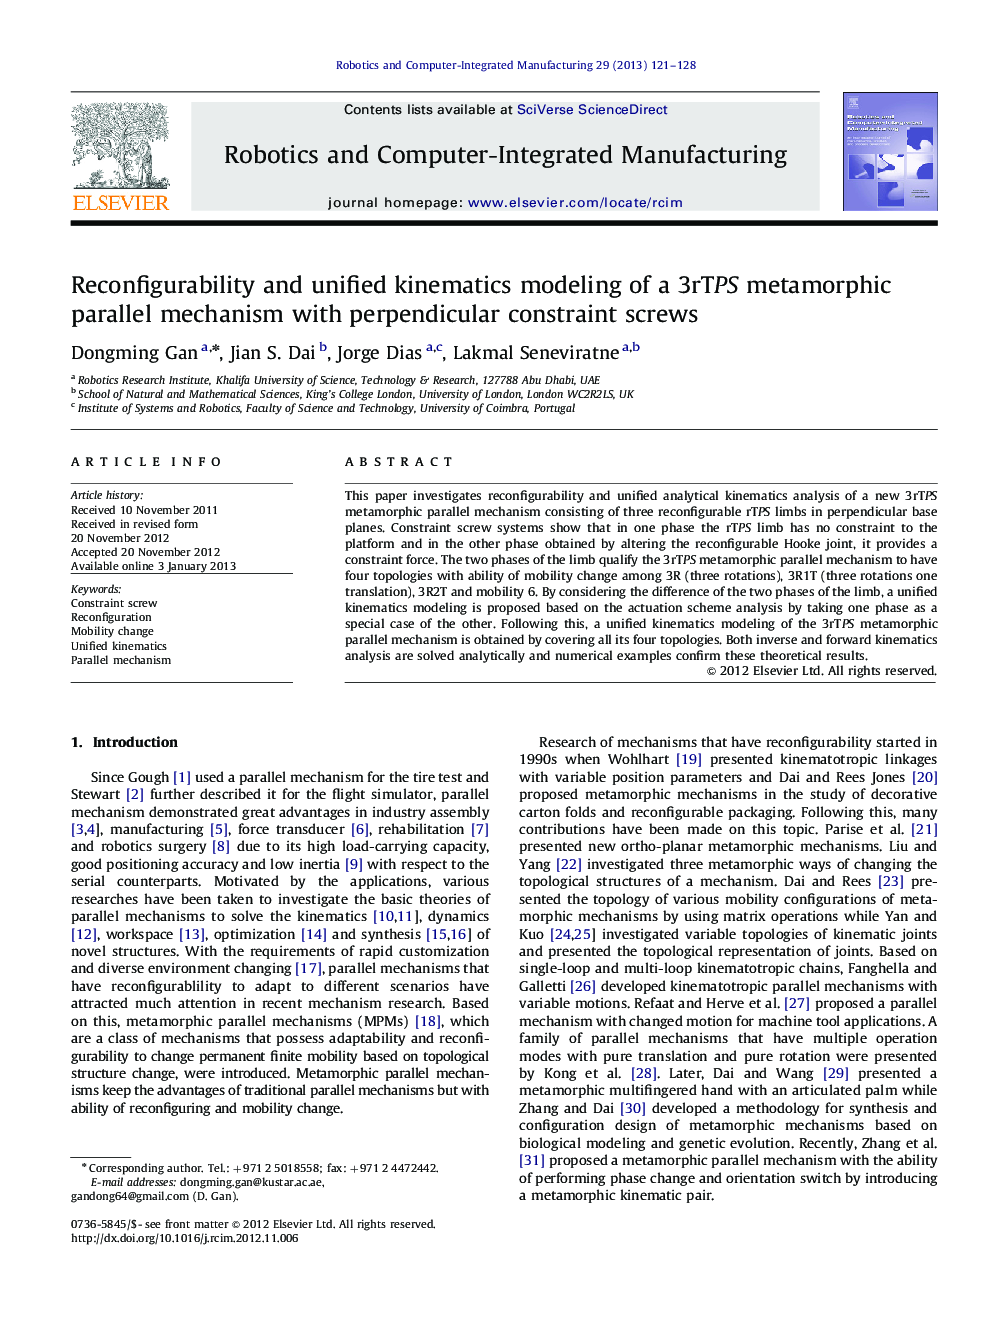 Reconfigurability and unified kinematics modeling of a 3rTPS metamorphic parallel mechanism with perpendicular constraint screws